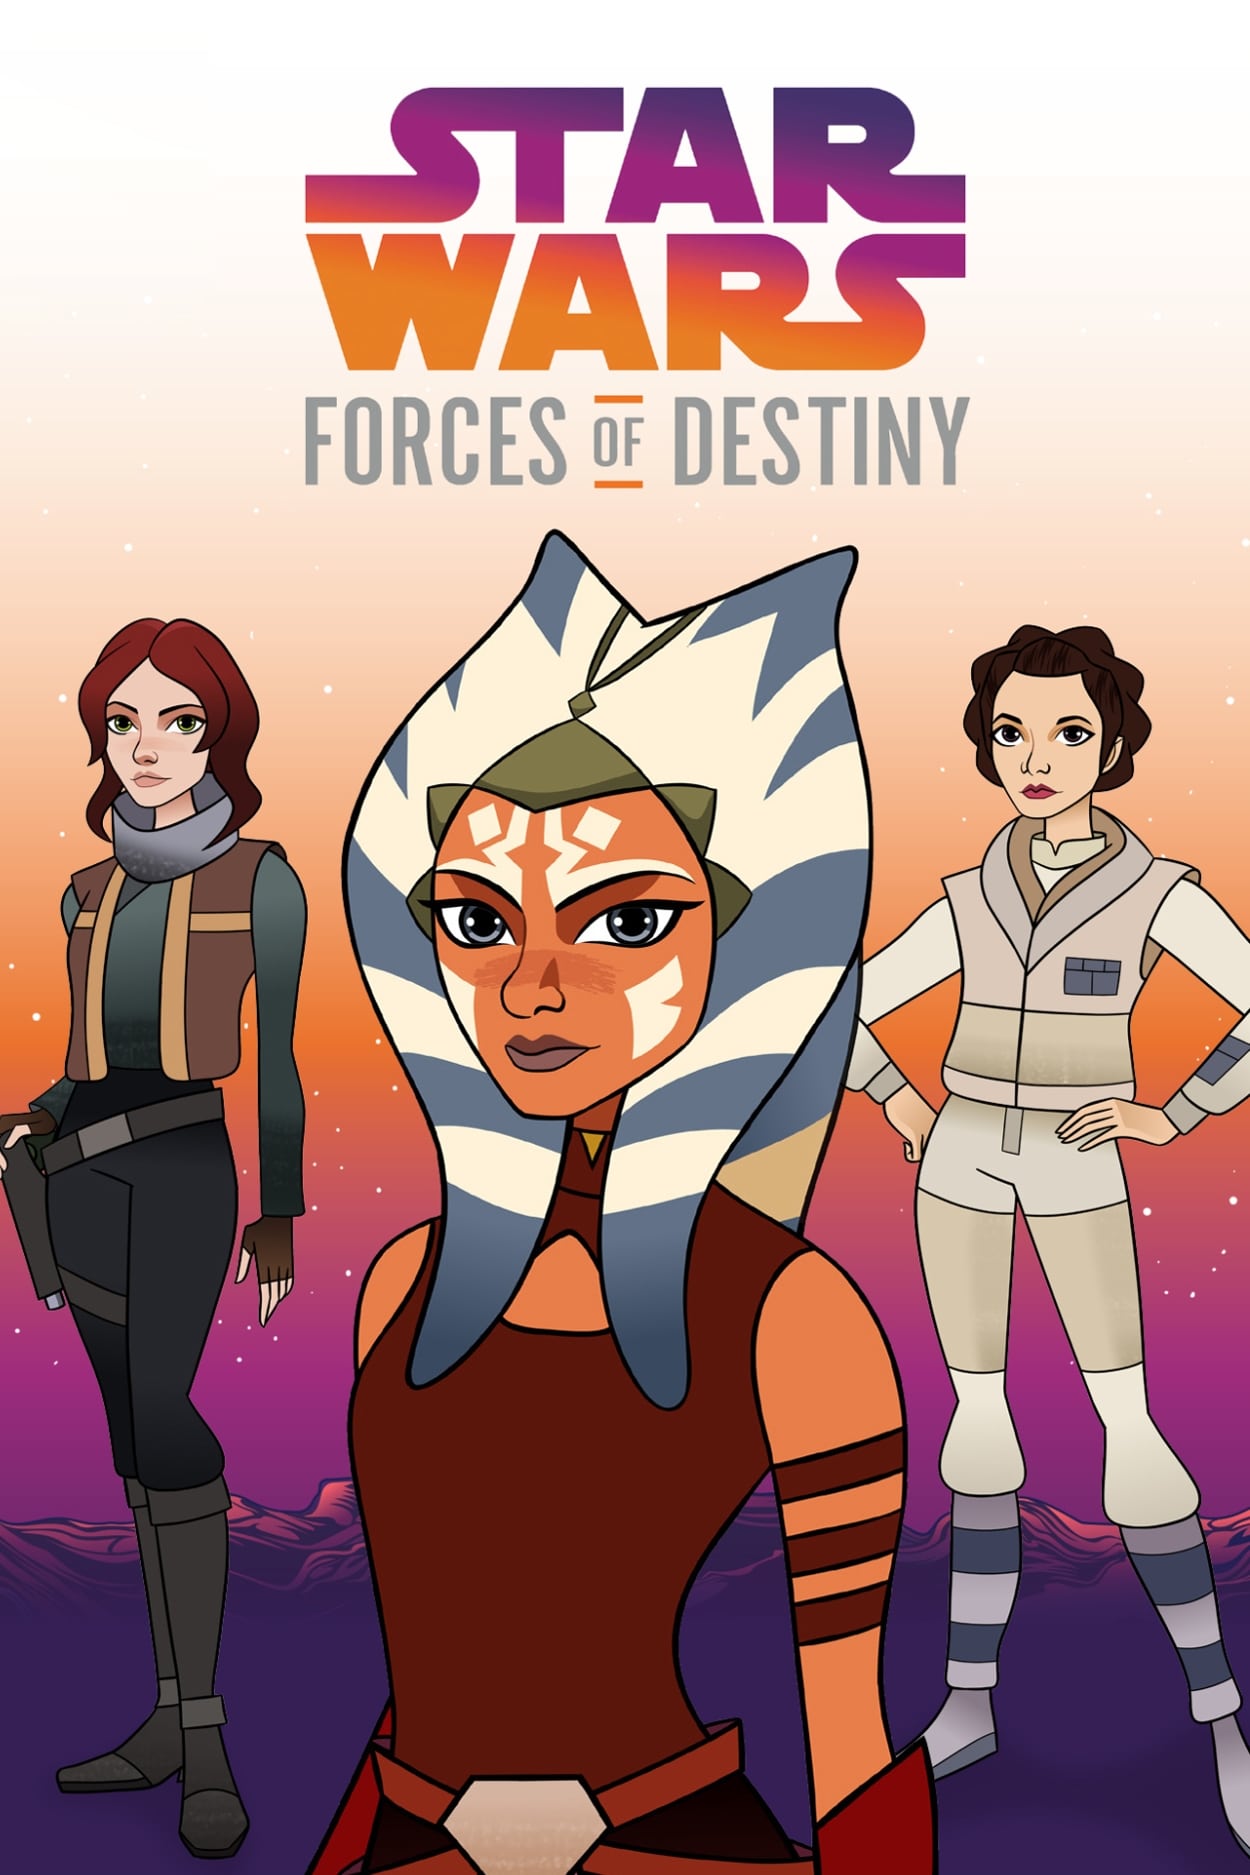 Star Wars: Forces of Destiny TV Shows About Space Opera